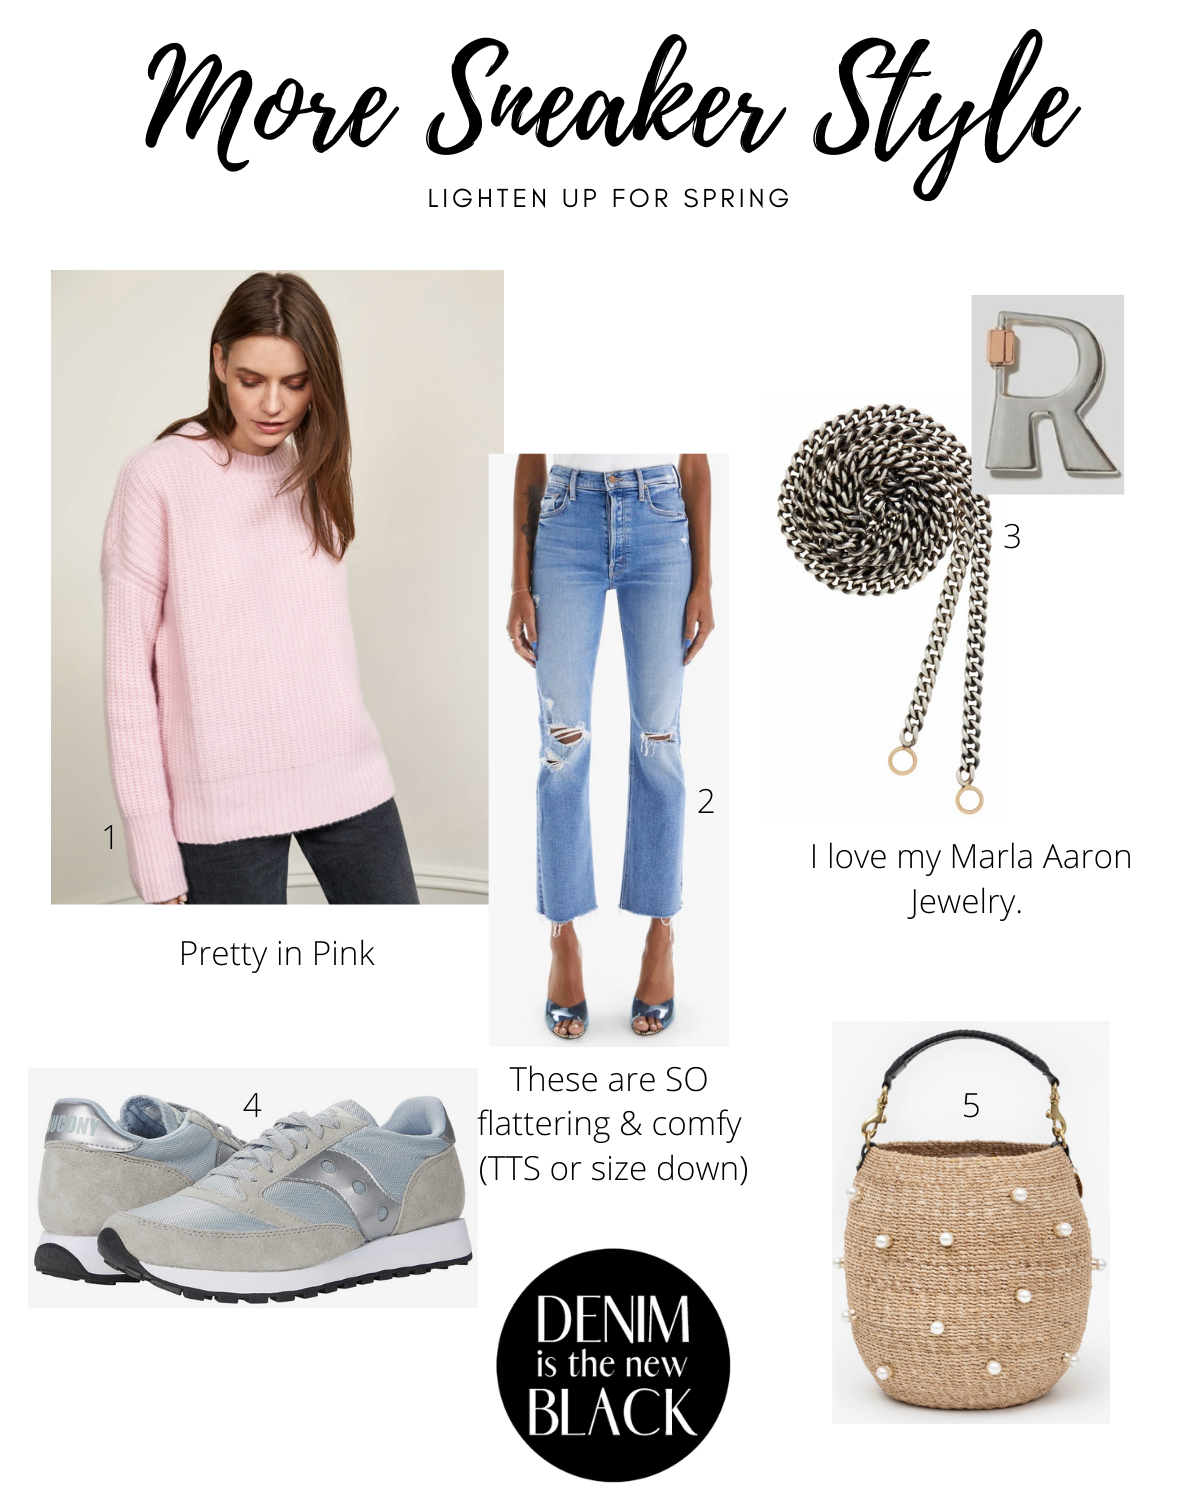 How to wear sneakers stylishly in spring style board.